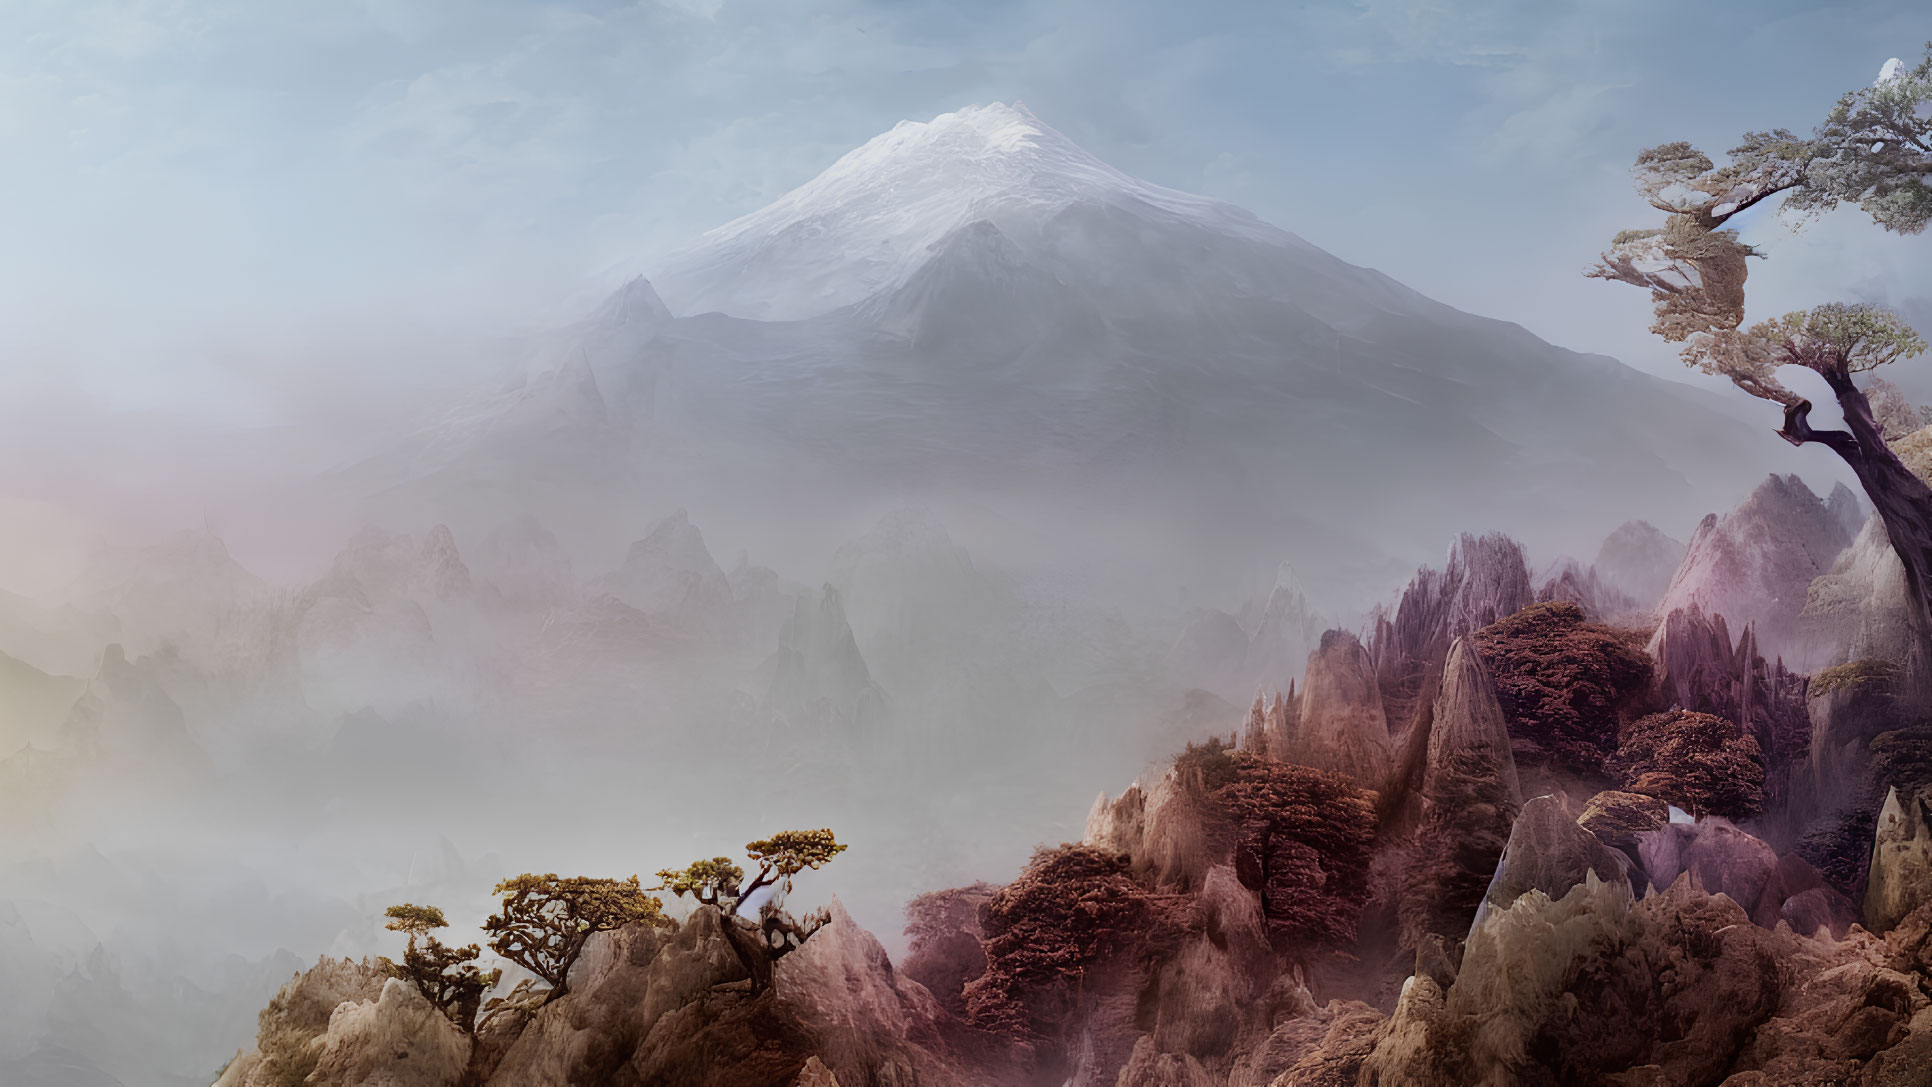 Snow-capped peak in misty mountainous landscape with rugged terrain and sparse trees.